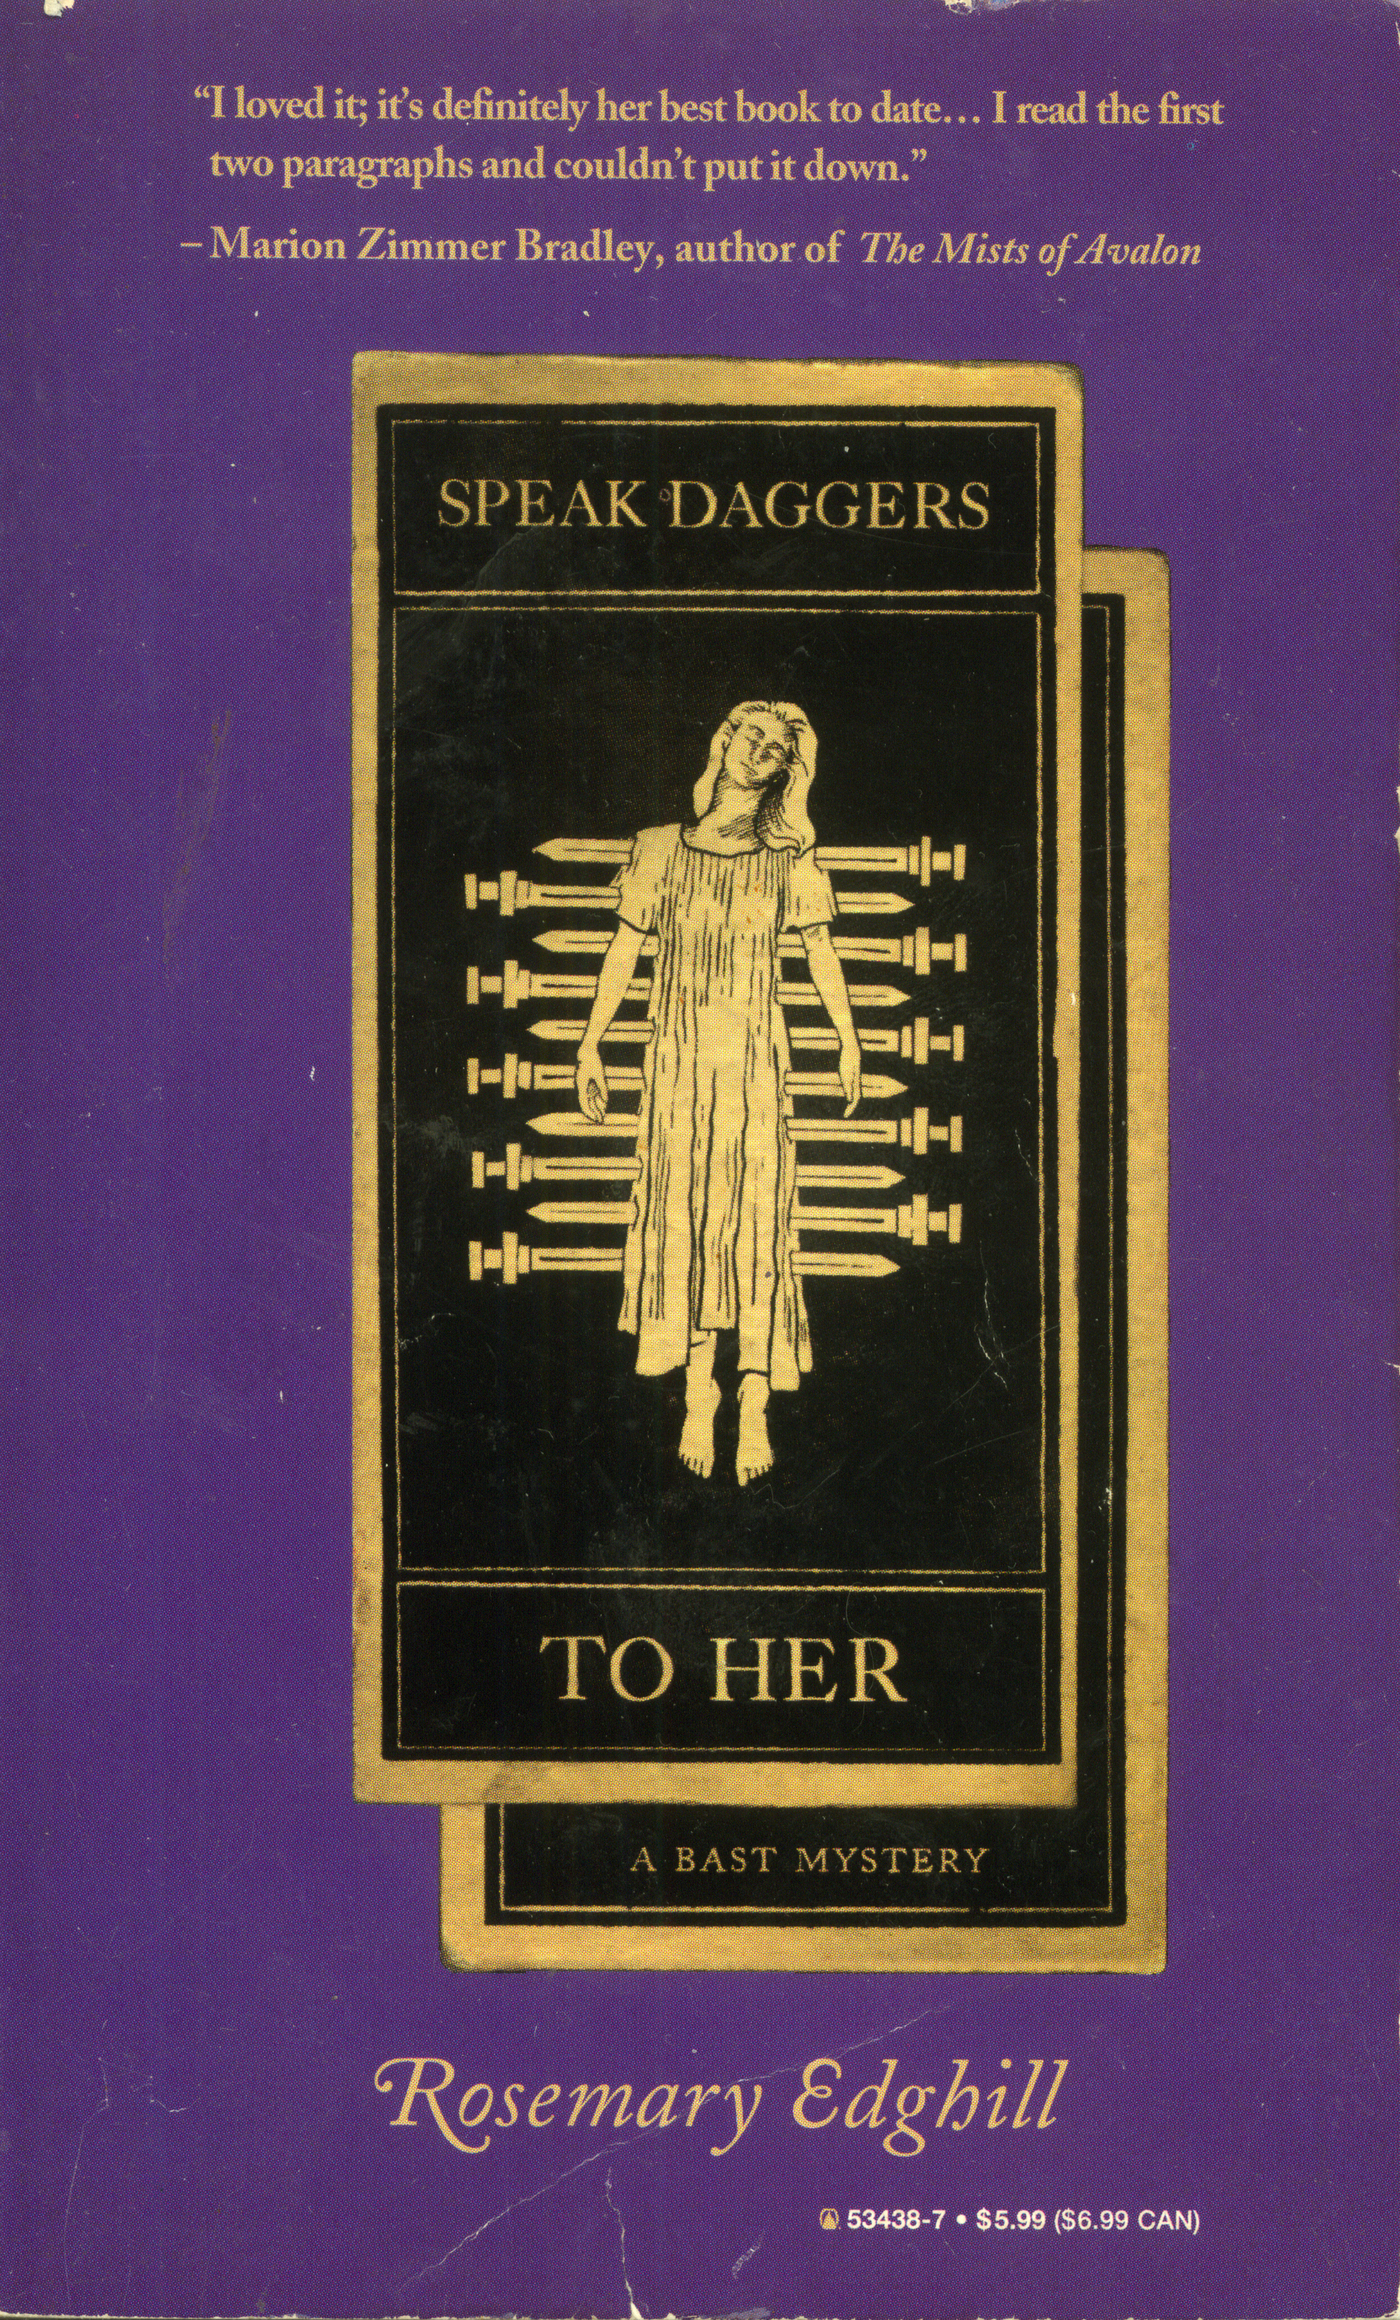 Speak Daggers To Her : A Bast Mystery by Rosemary Edghill